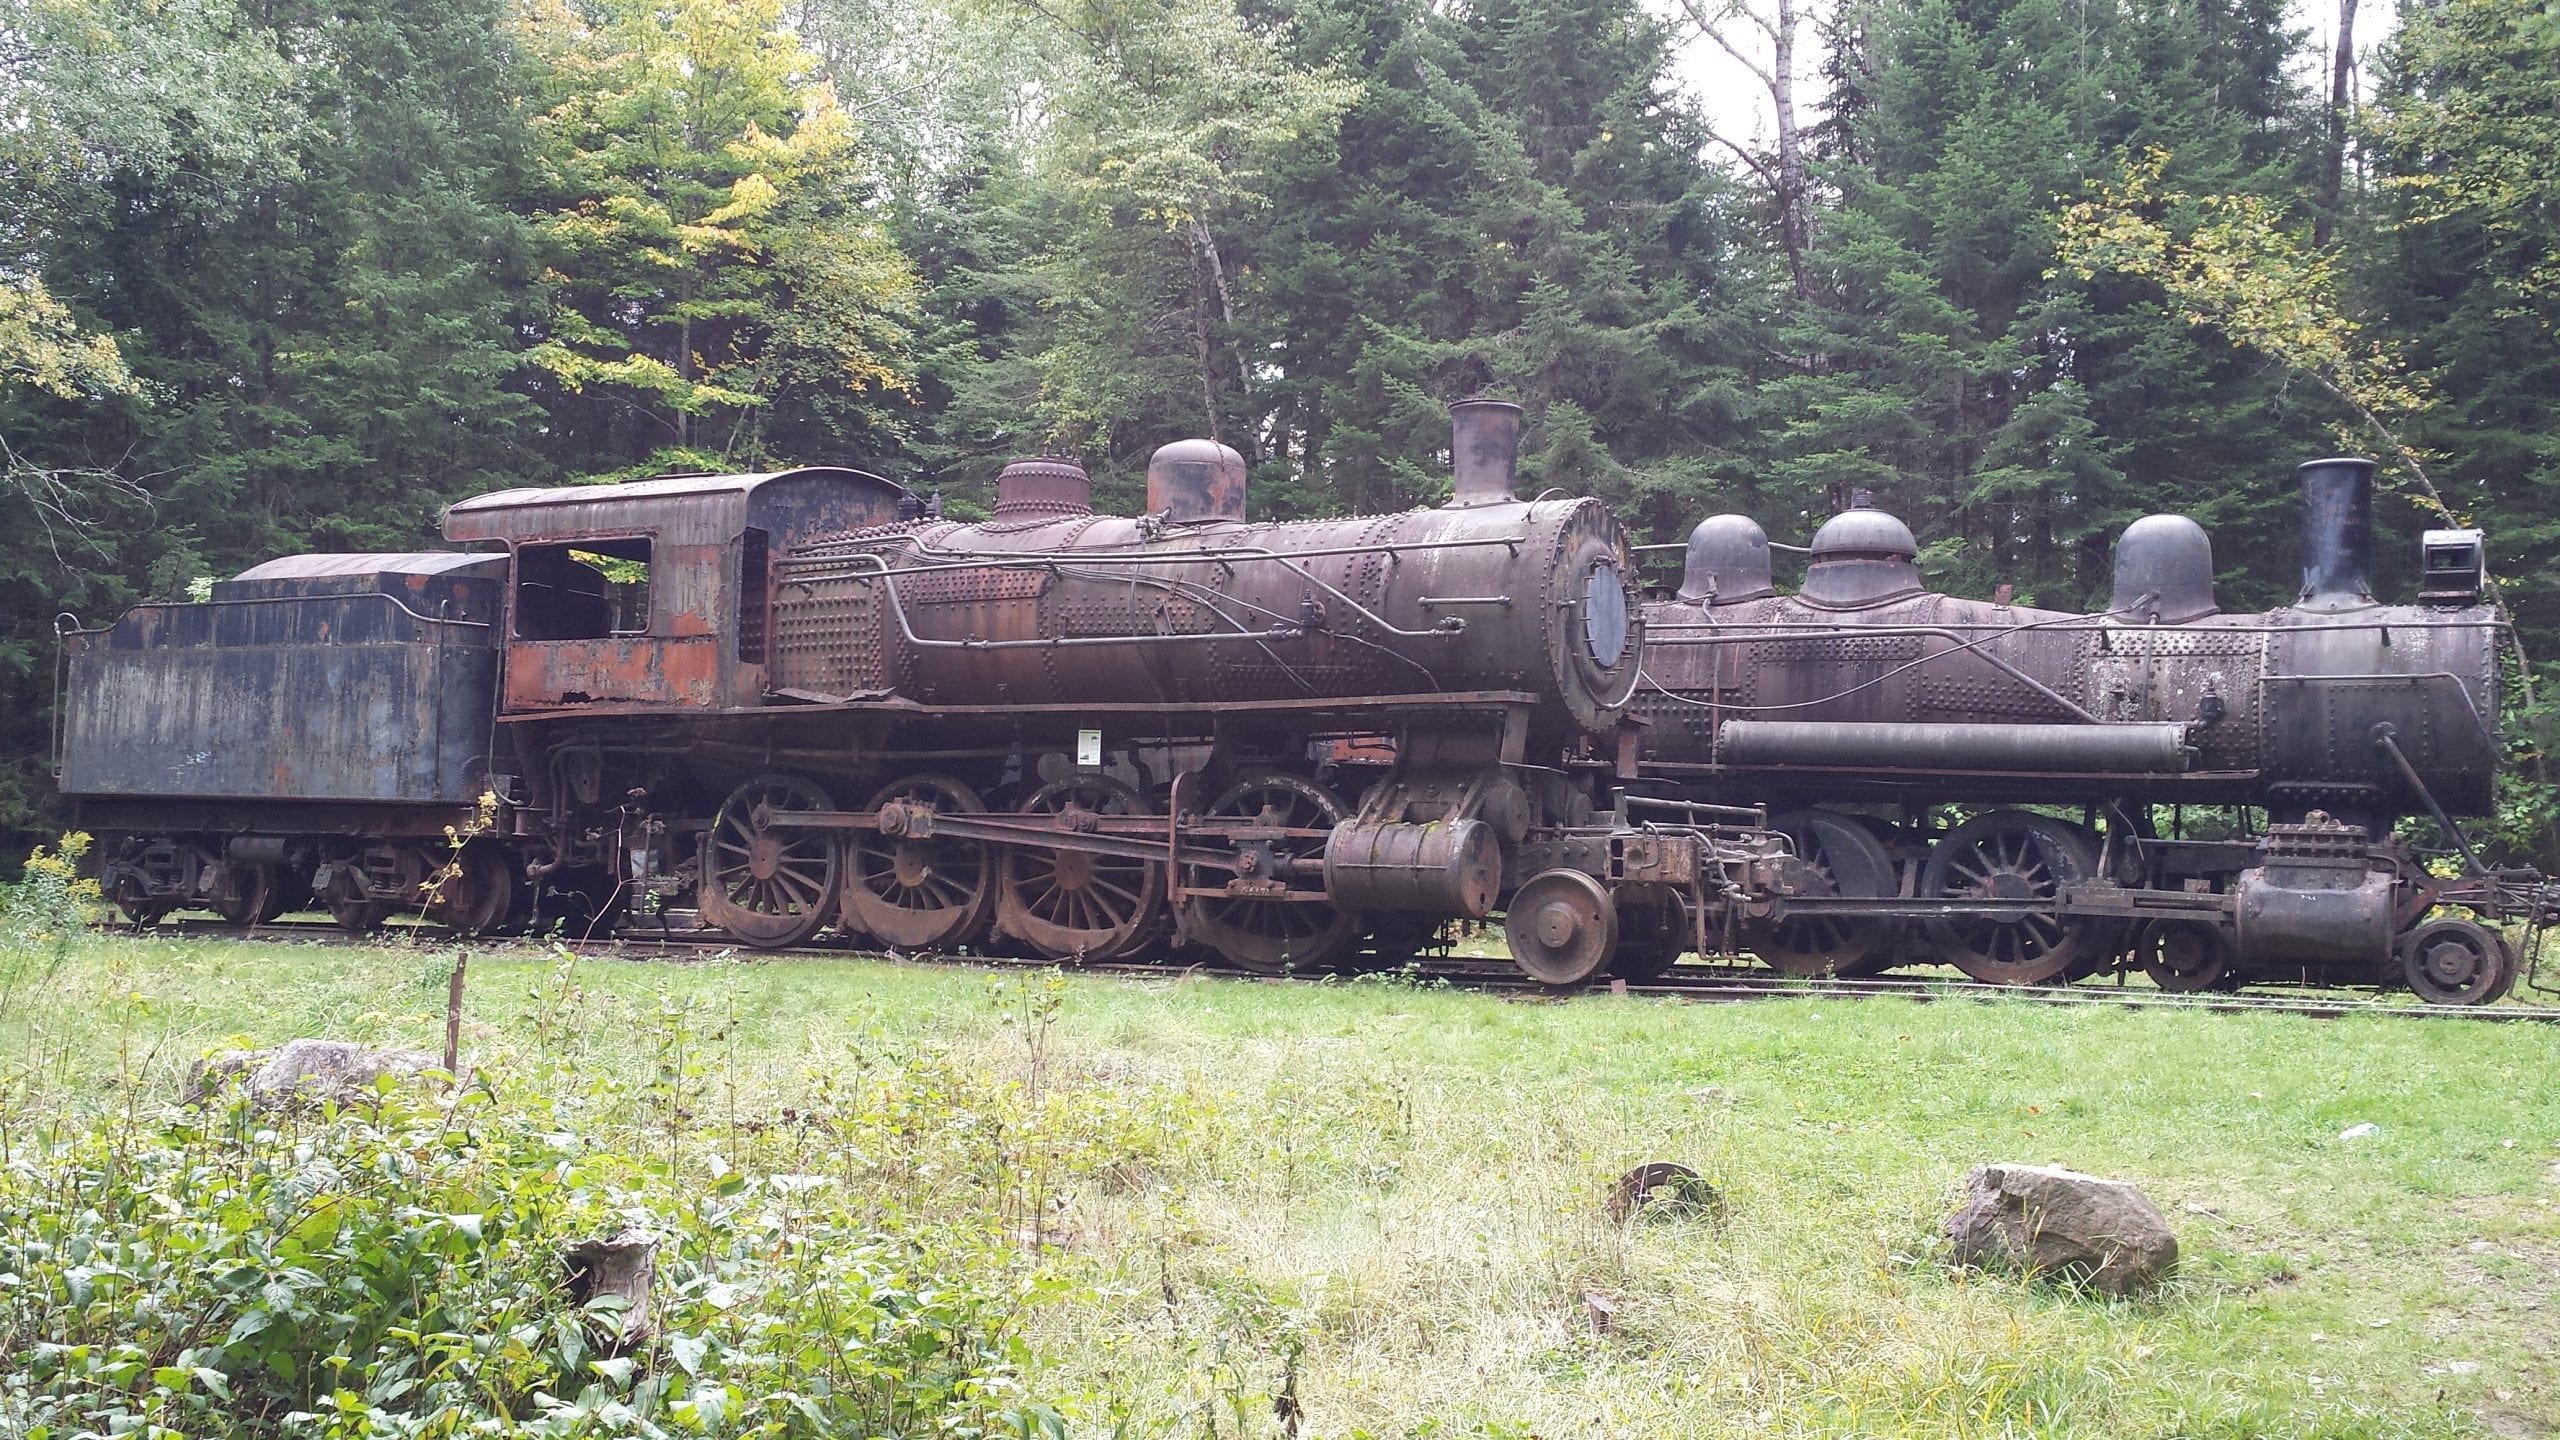 How to find the Abandoned Locomotives of the Eagle Lake & West Branch Railroad in the Northern Maine Woods